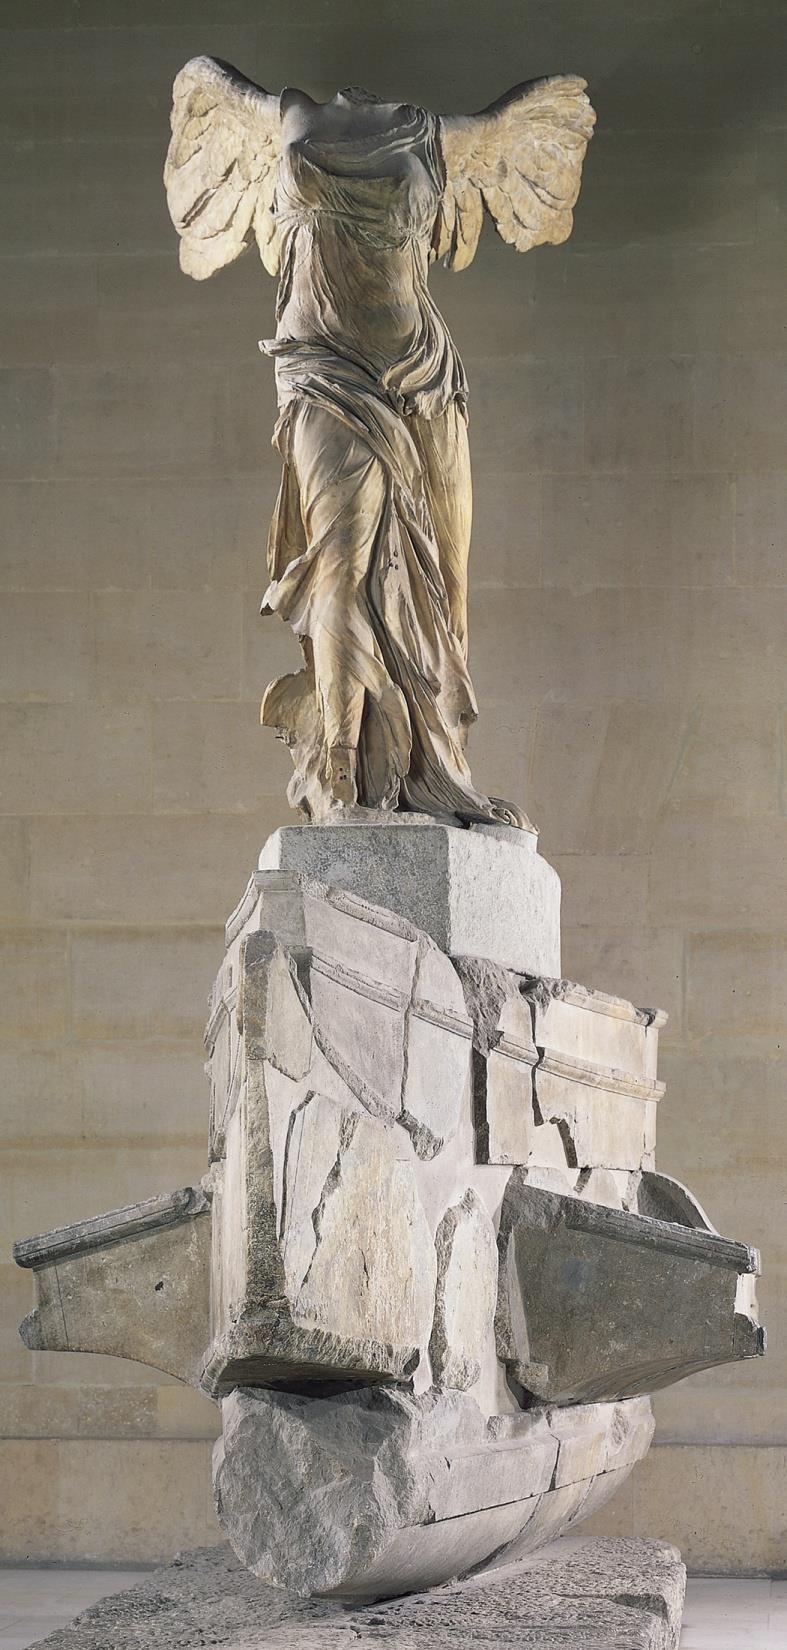 #37 Winged Victory of Samothrace. Hellenistic Greek. C. 190 BCE. Marble.